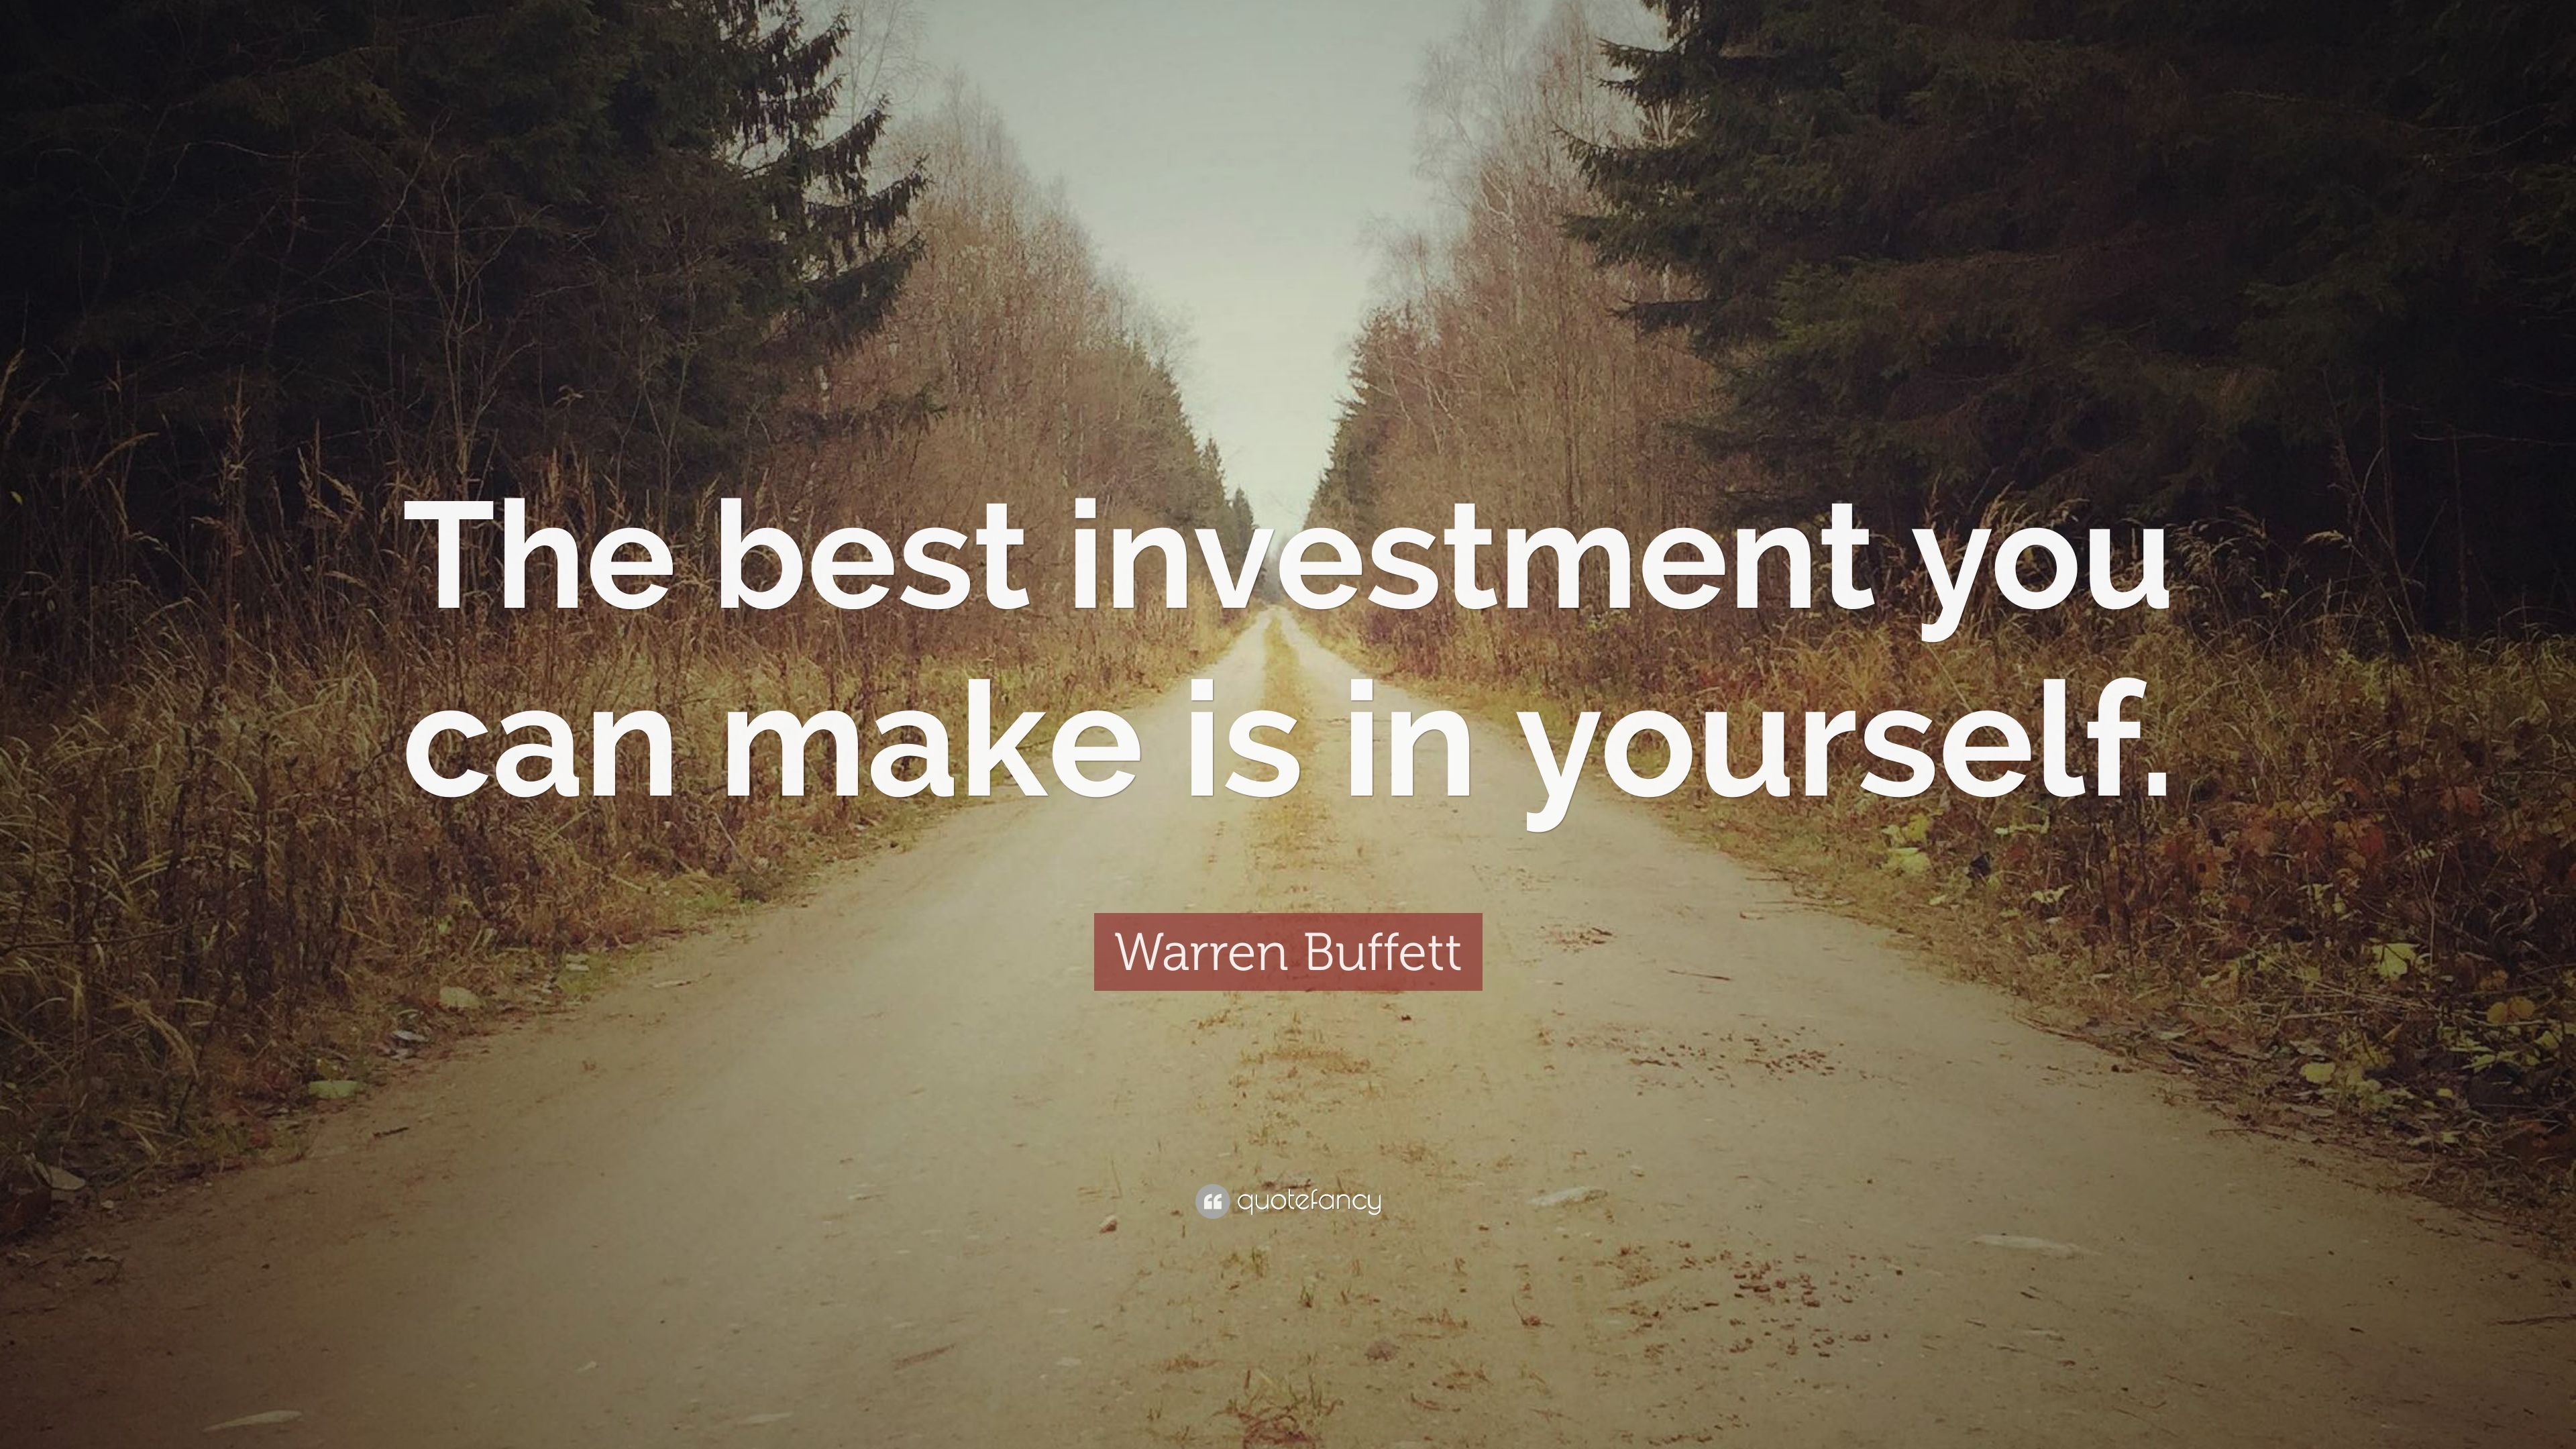 Warren Buffett Quote: “The best investment you can make is in yourself.” (12 wallpaper)